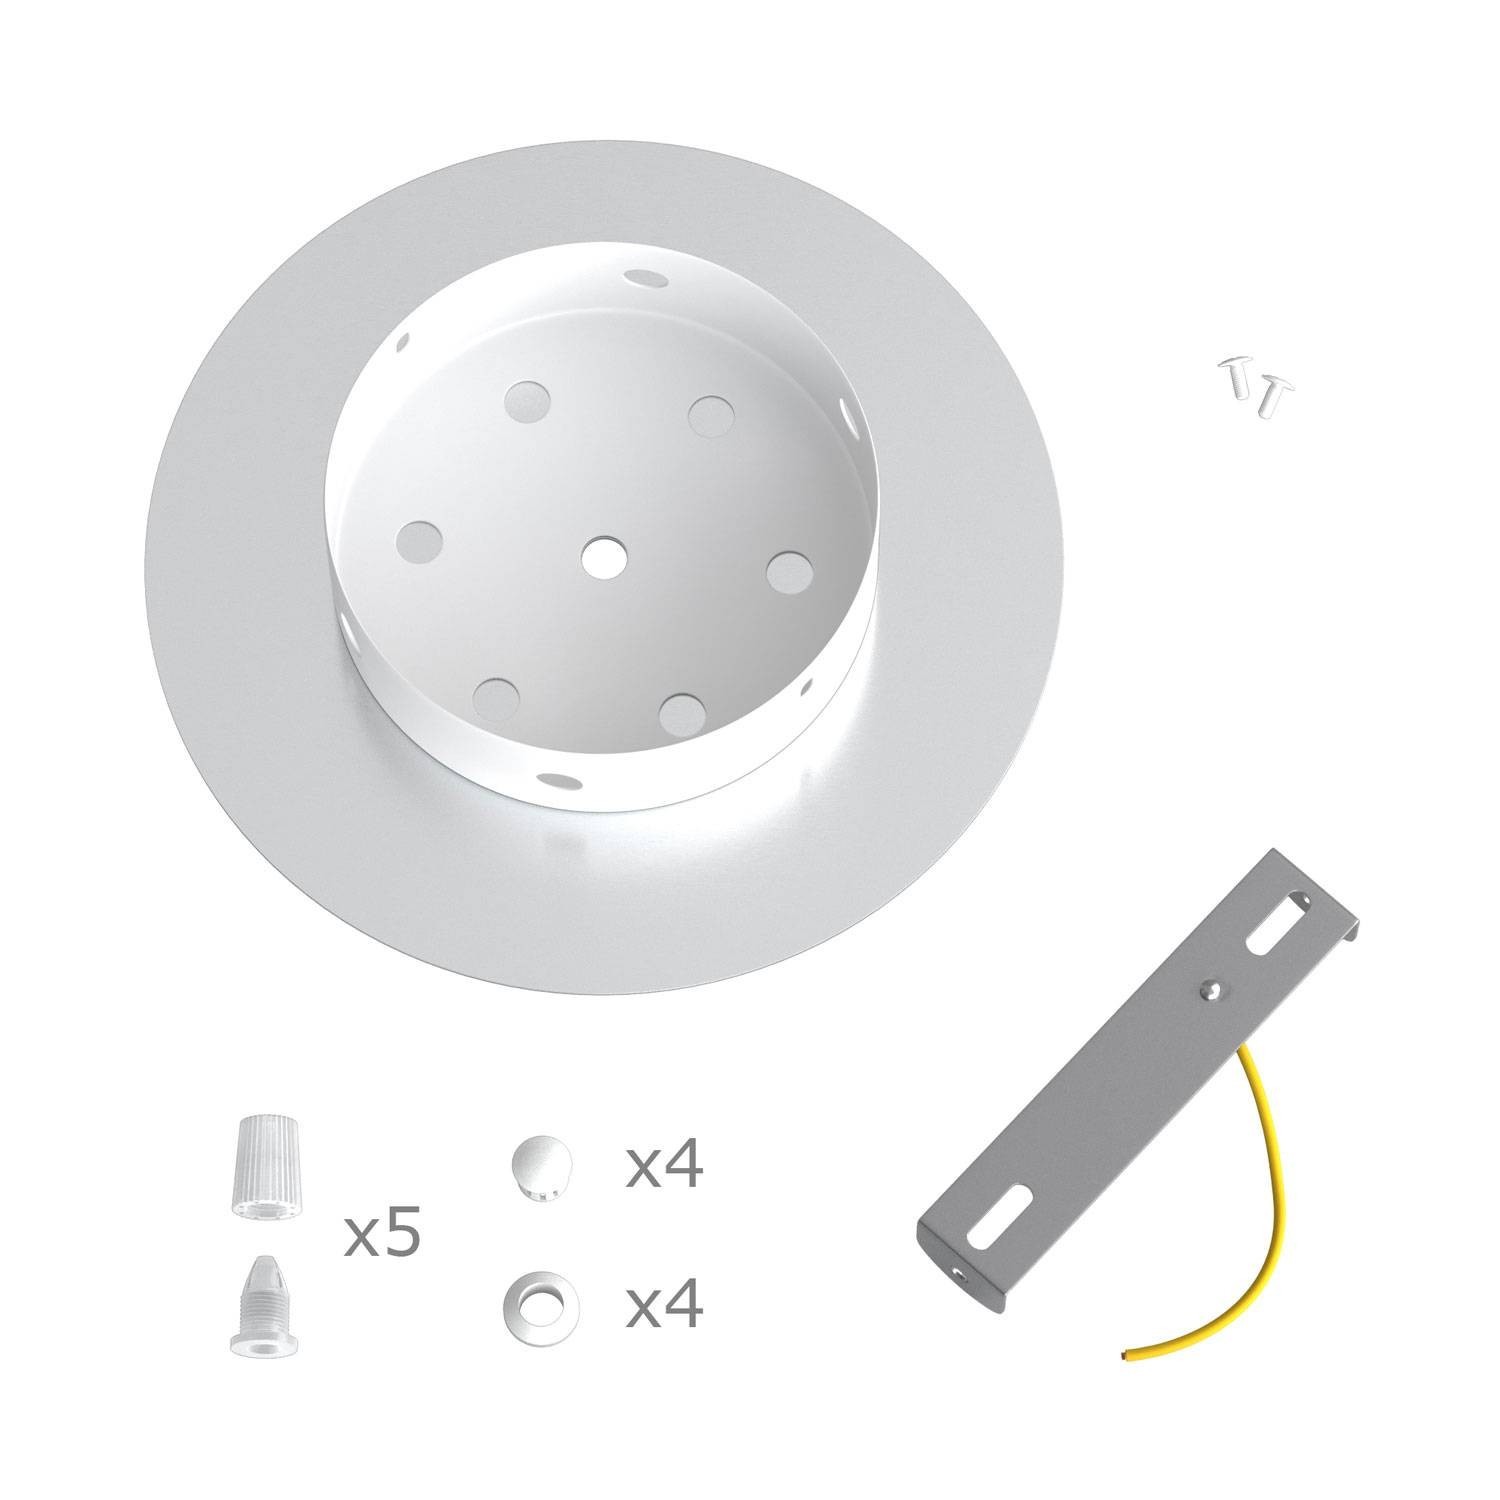 Round Rose-One 5-hole and 4 side holes ceiling rose kit, 200 mm - PROMO